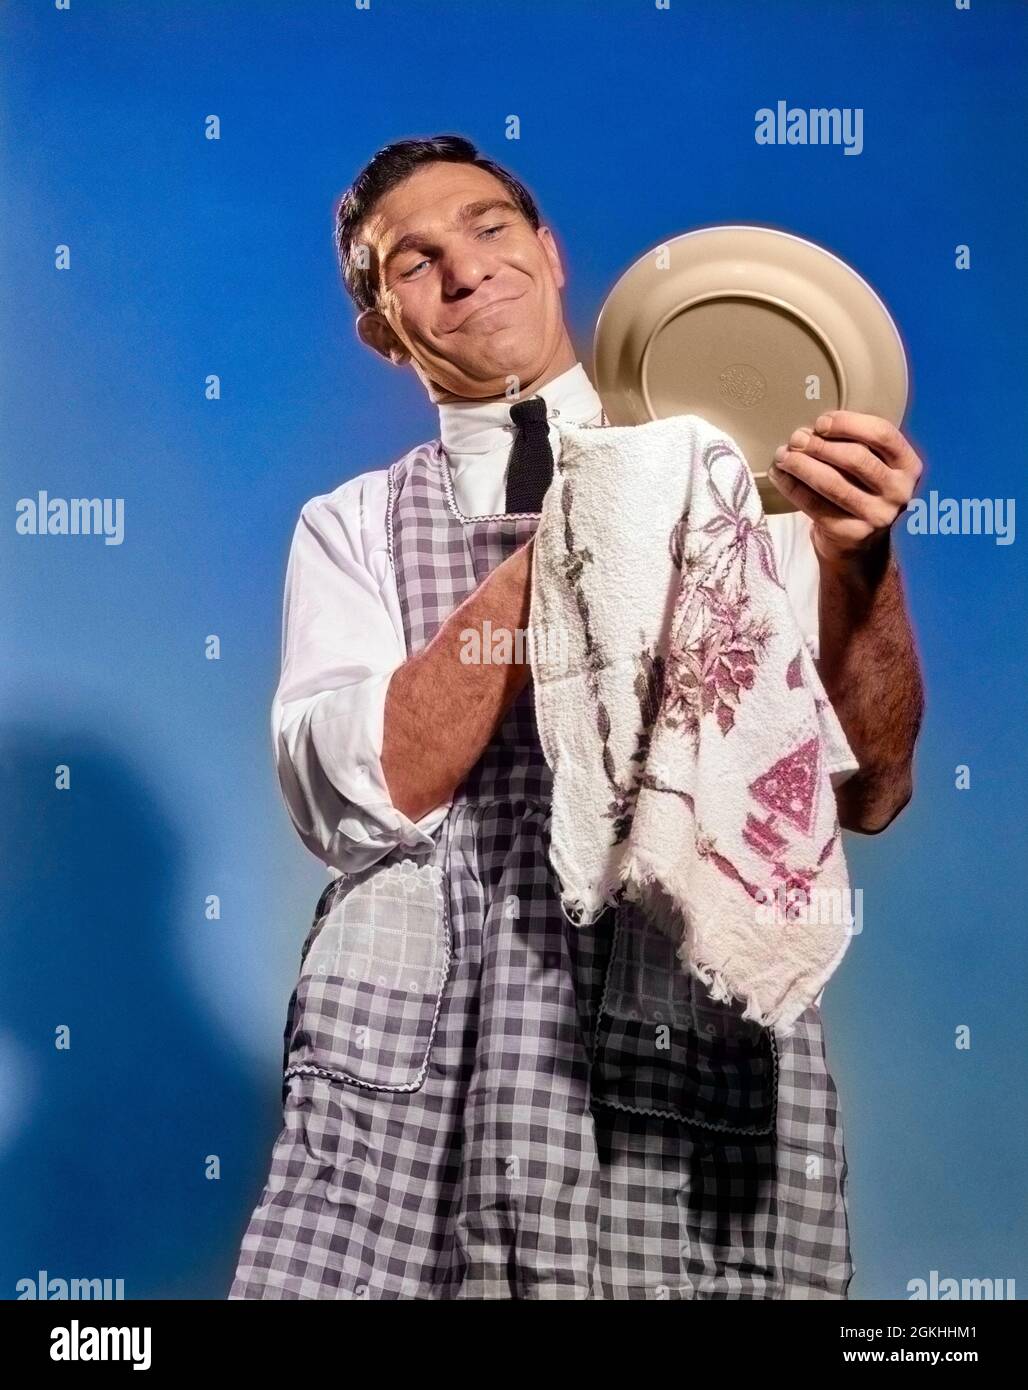 1960s 1950s SMILING MAN HUSBAND IN APRON WASHING AND DRYING DISHES IN KITCHEN - s10163c DEB001 HARS OLD FASHION 1 TOWEL DISH ASSISTANT LIFESTYLE STUDIO SHOT HOME LIFE COPY SPACE HALF-LENGTH DRY CLOTH CARING AMERICANA B&W WOMAN'S WIPE HAPPINESS CHORE DRYING MATE GLAD WOMAN'S LIBERATION LOW ANGLE PRIDE UP DISH TOWEL CLEAN UP DELIGHT HOUSEHUSBAND DEB001 MIDDLE AGE ASSIST LIBERATED LIBERATION MID-ADULT MID-ADULT MAN BLACK AND WHITE CAUCASIAN ETHNICITY OLD FASHIONED Stock Photo